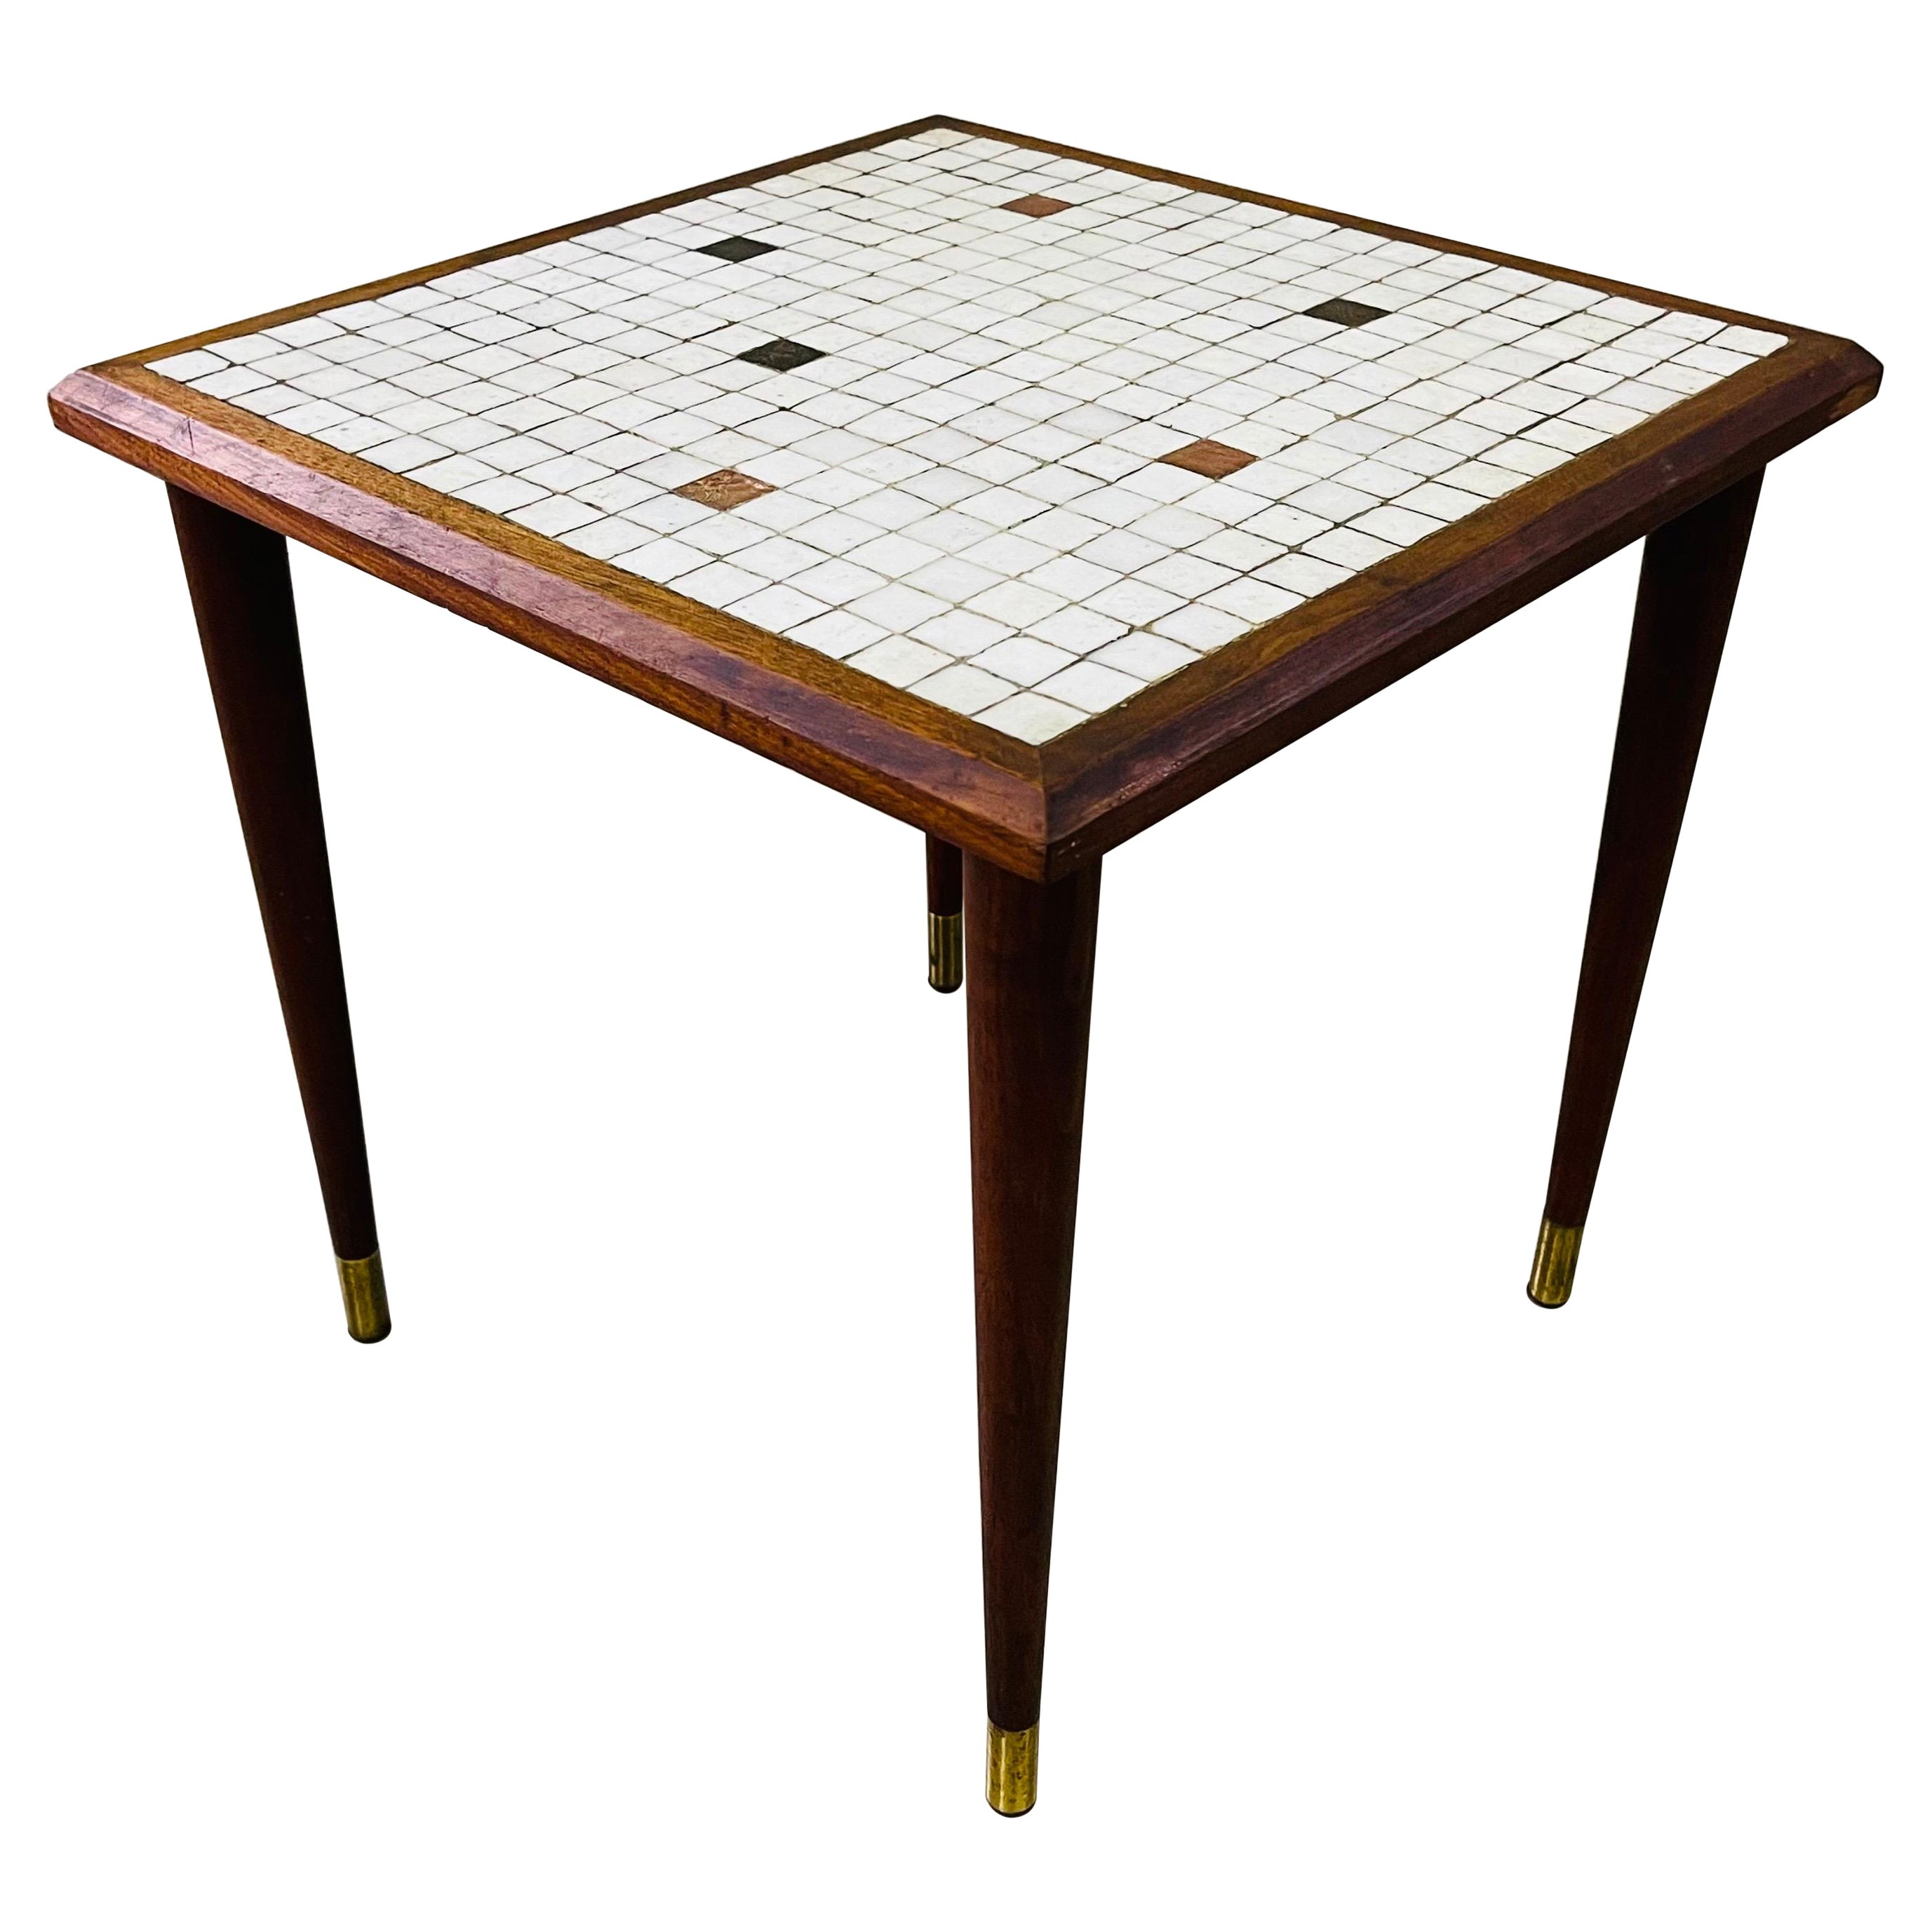 1960s Small Square Tile Top Side Table